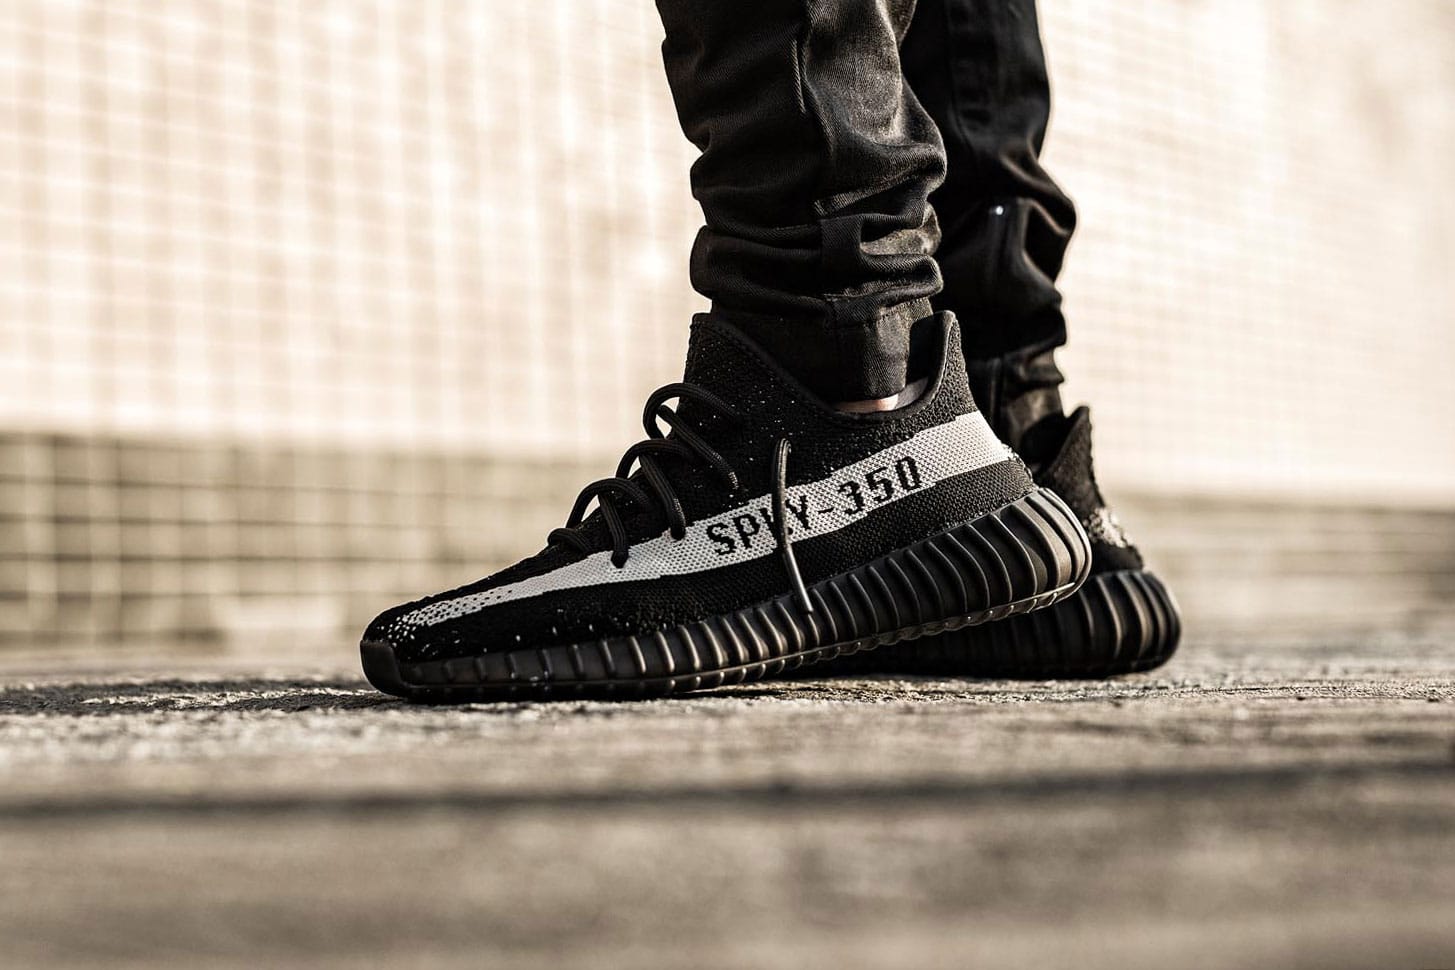 adidasyeezy boost 350 v2 core black